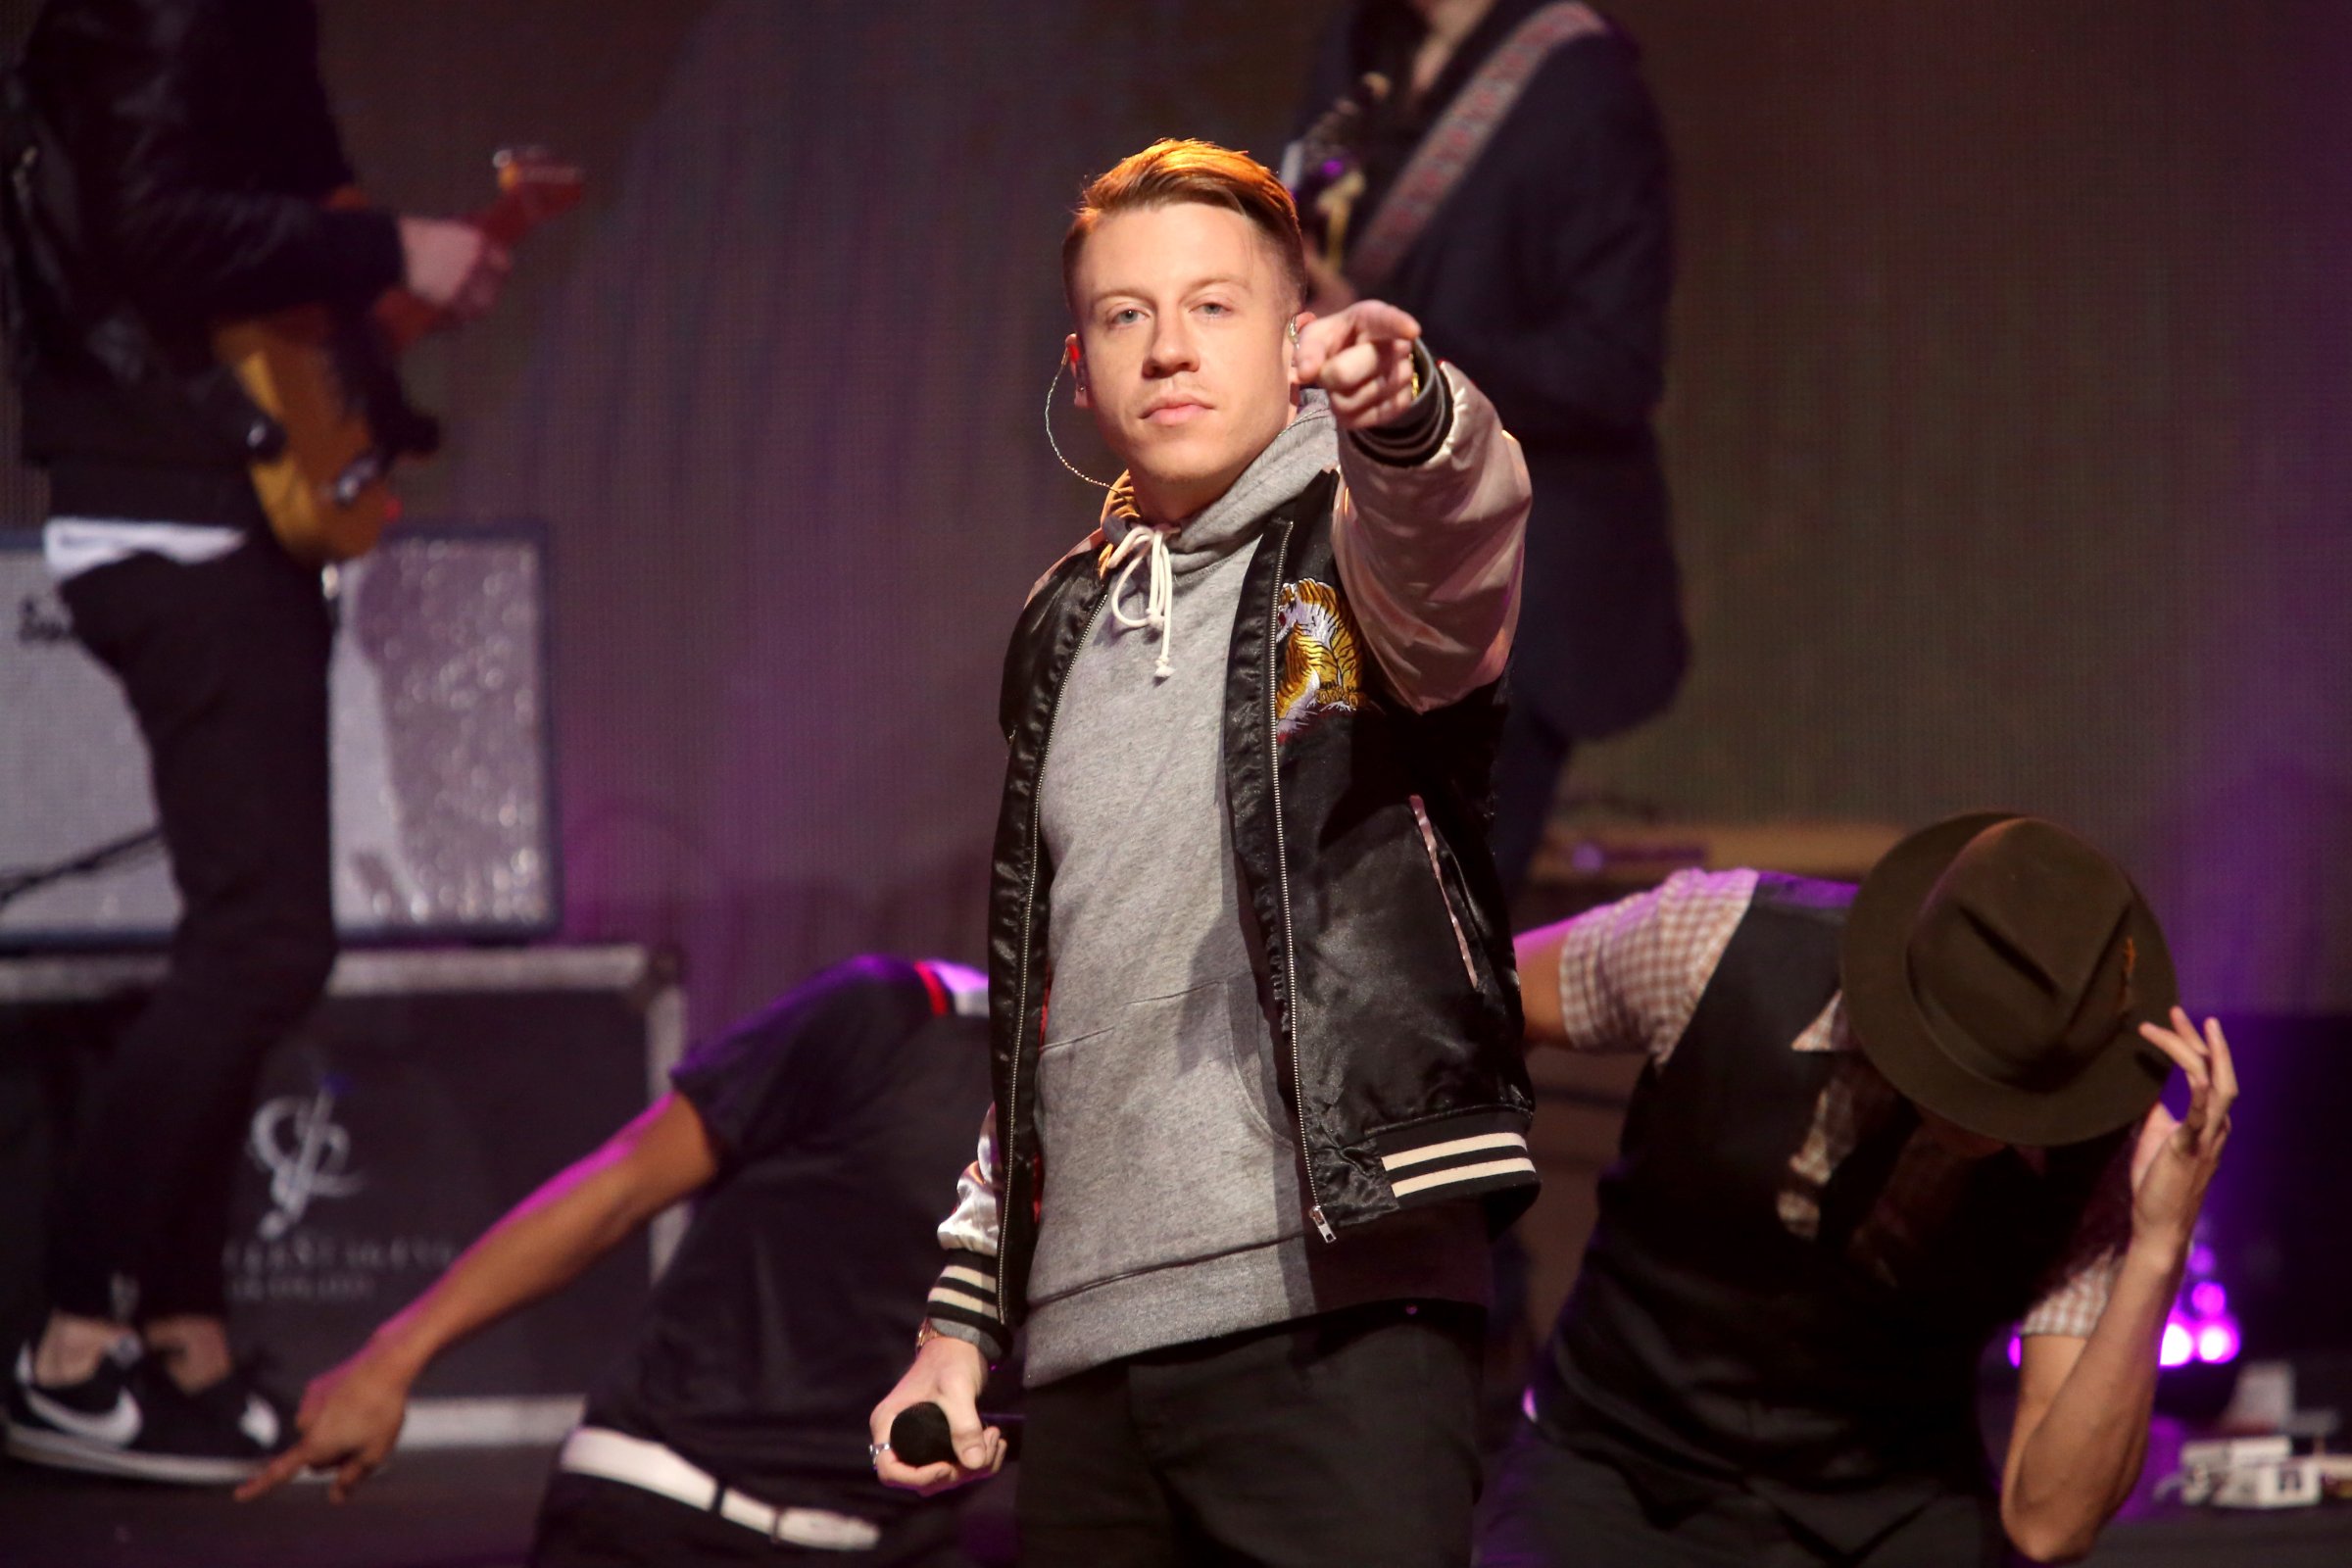 Macklemore performs onstage at Dick Clark's New Year's Rockin' Eve with Ryan Seacrest 2016 on December 31, 2015 in Los Angeles, CA.